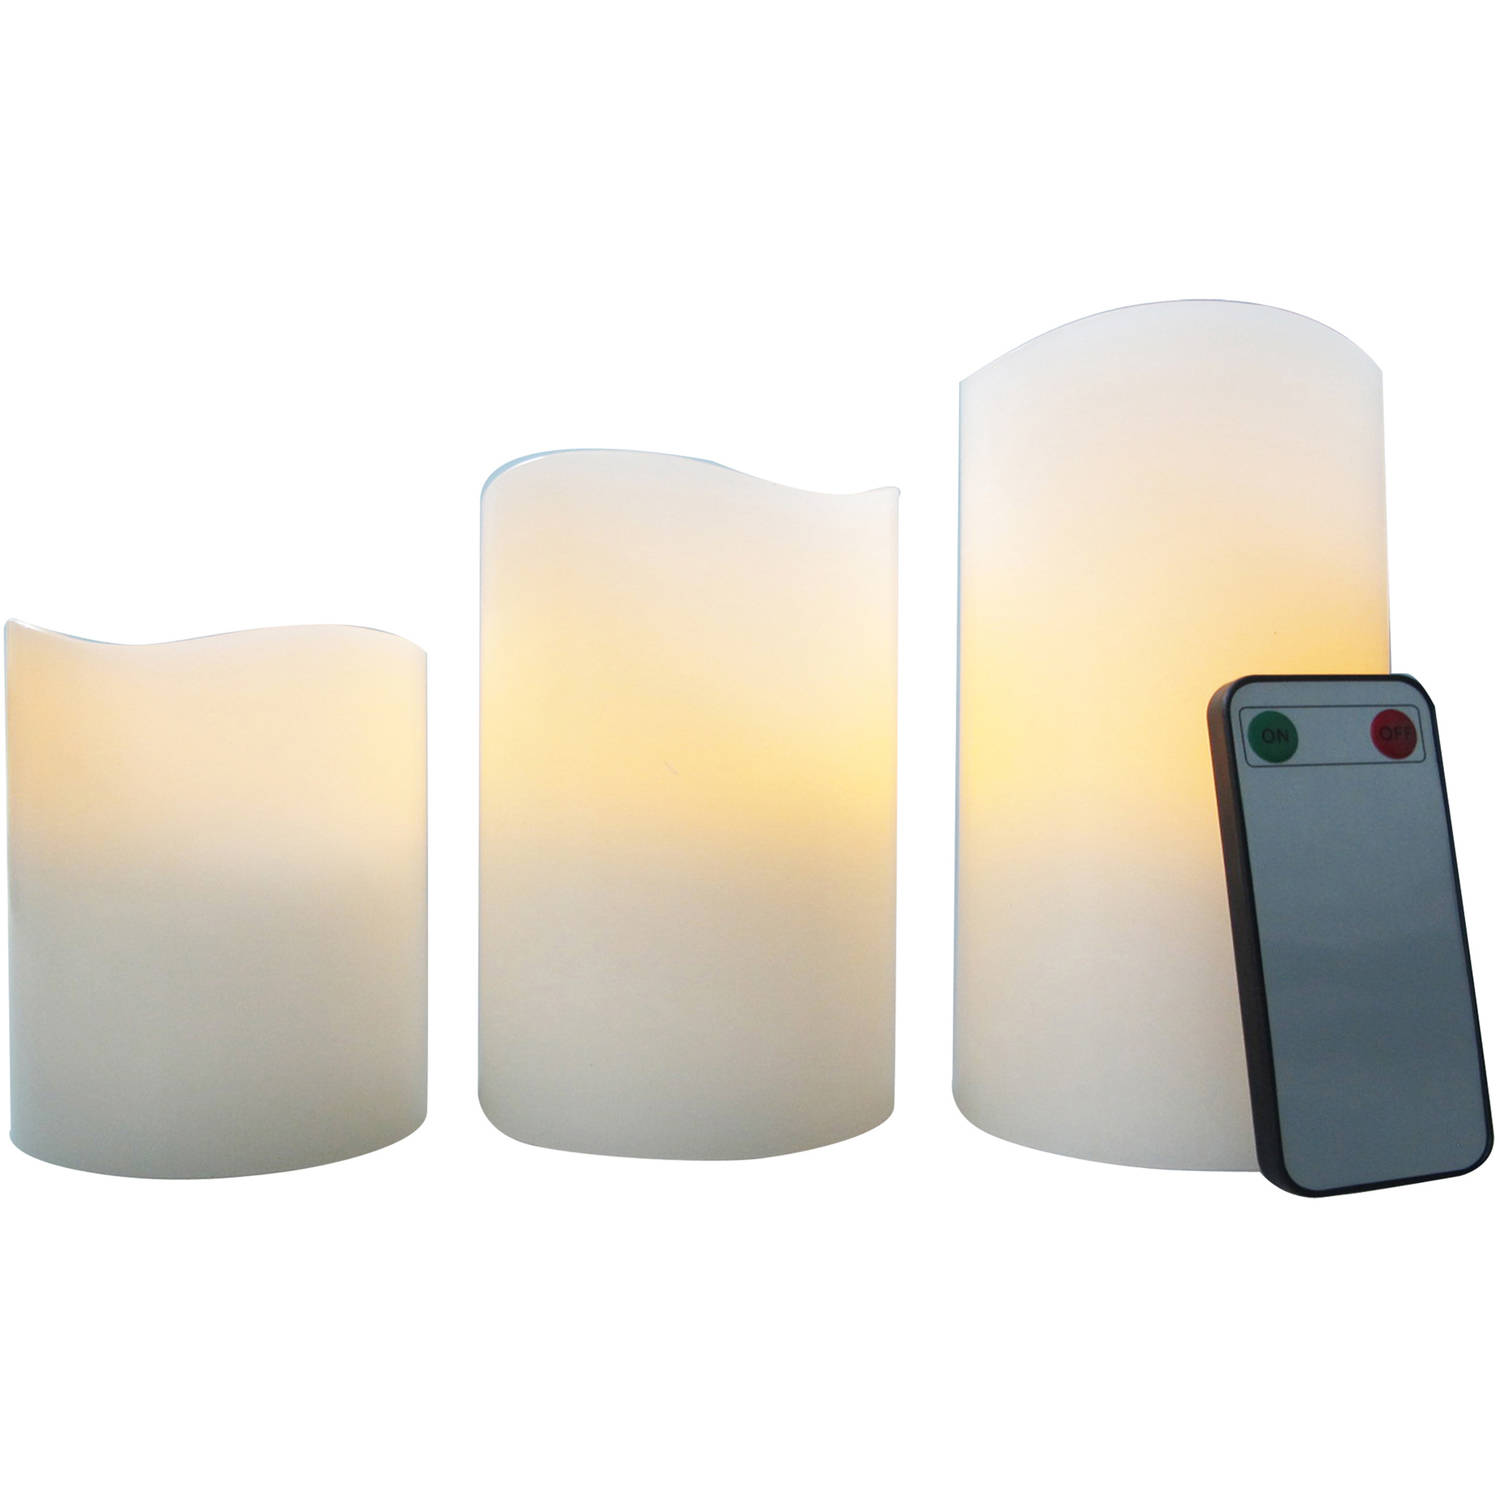 Better Homes & Gardens Flameless LED Pillar Candles 3-Pack Vanilla Scented - image 1 of 9